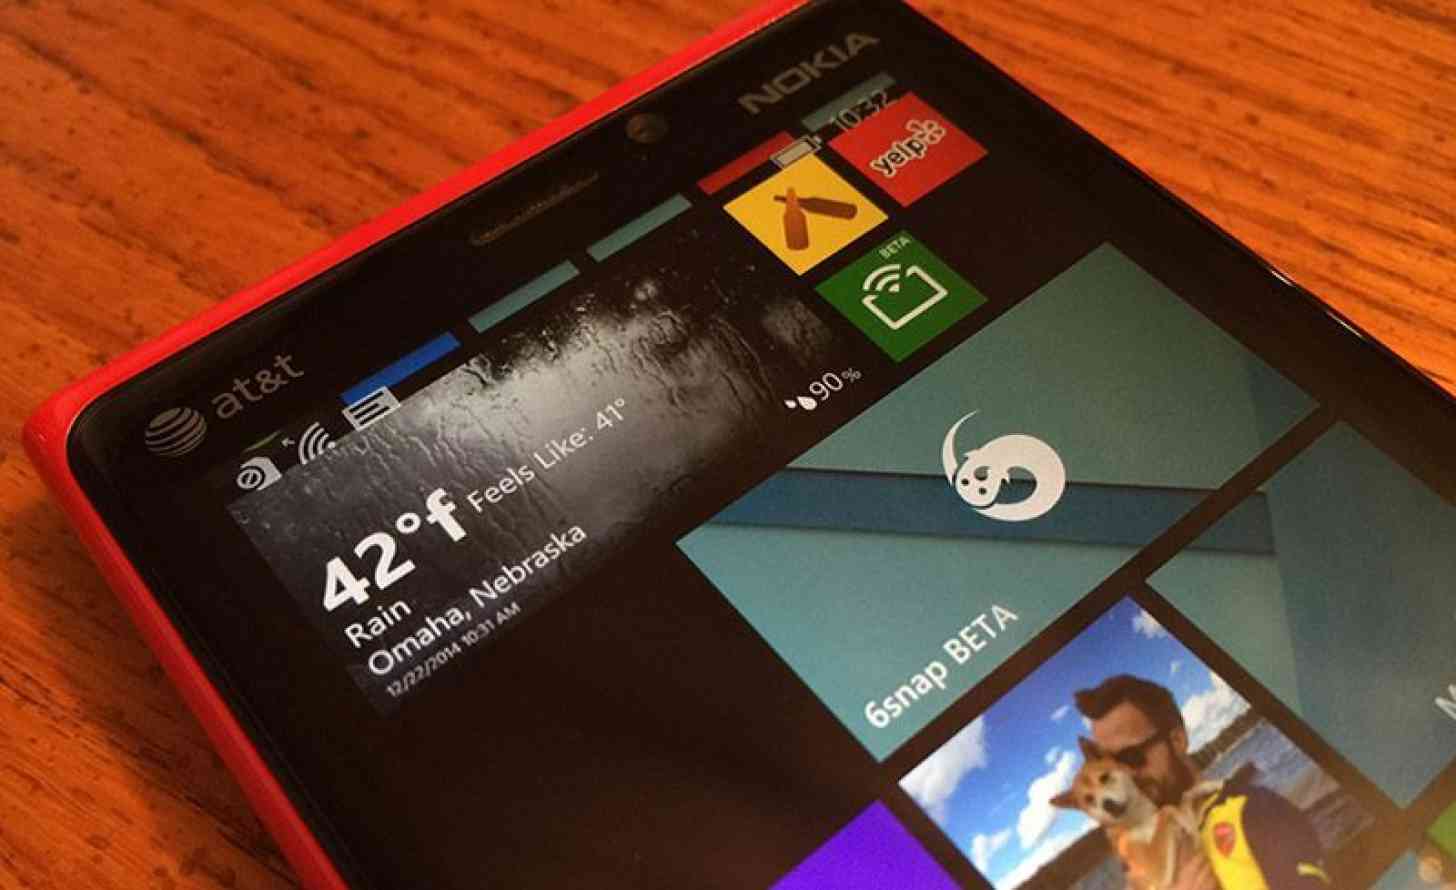 6snap for Windows Phone